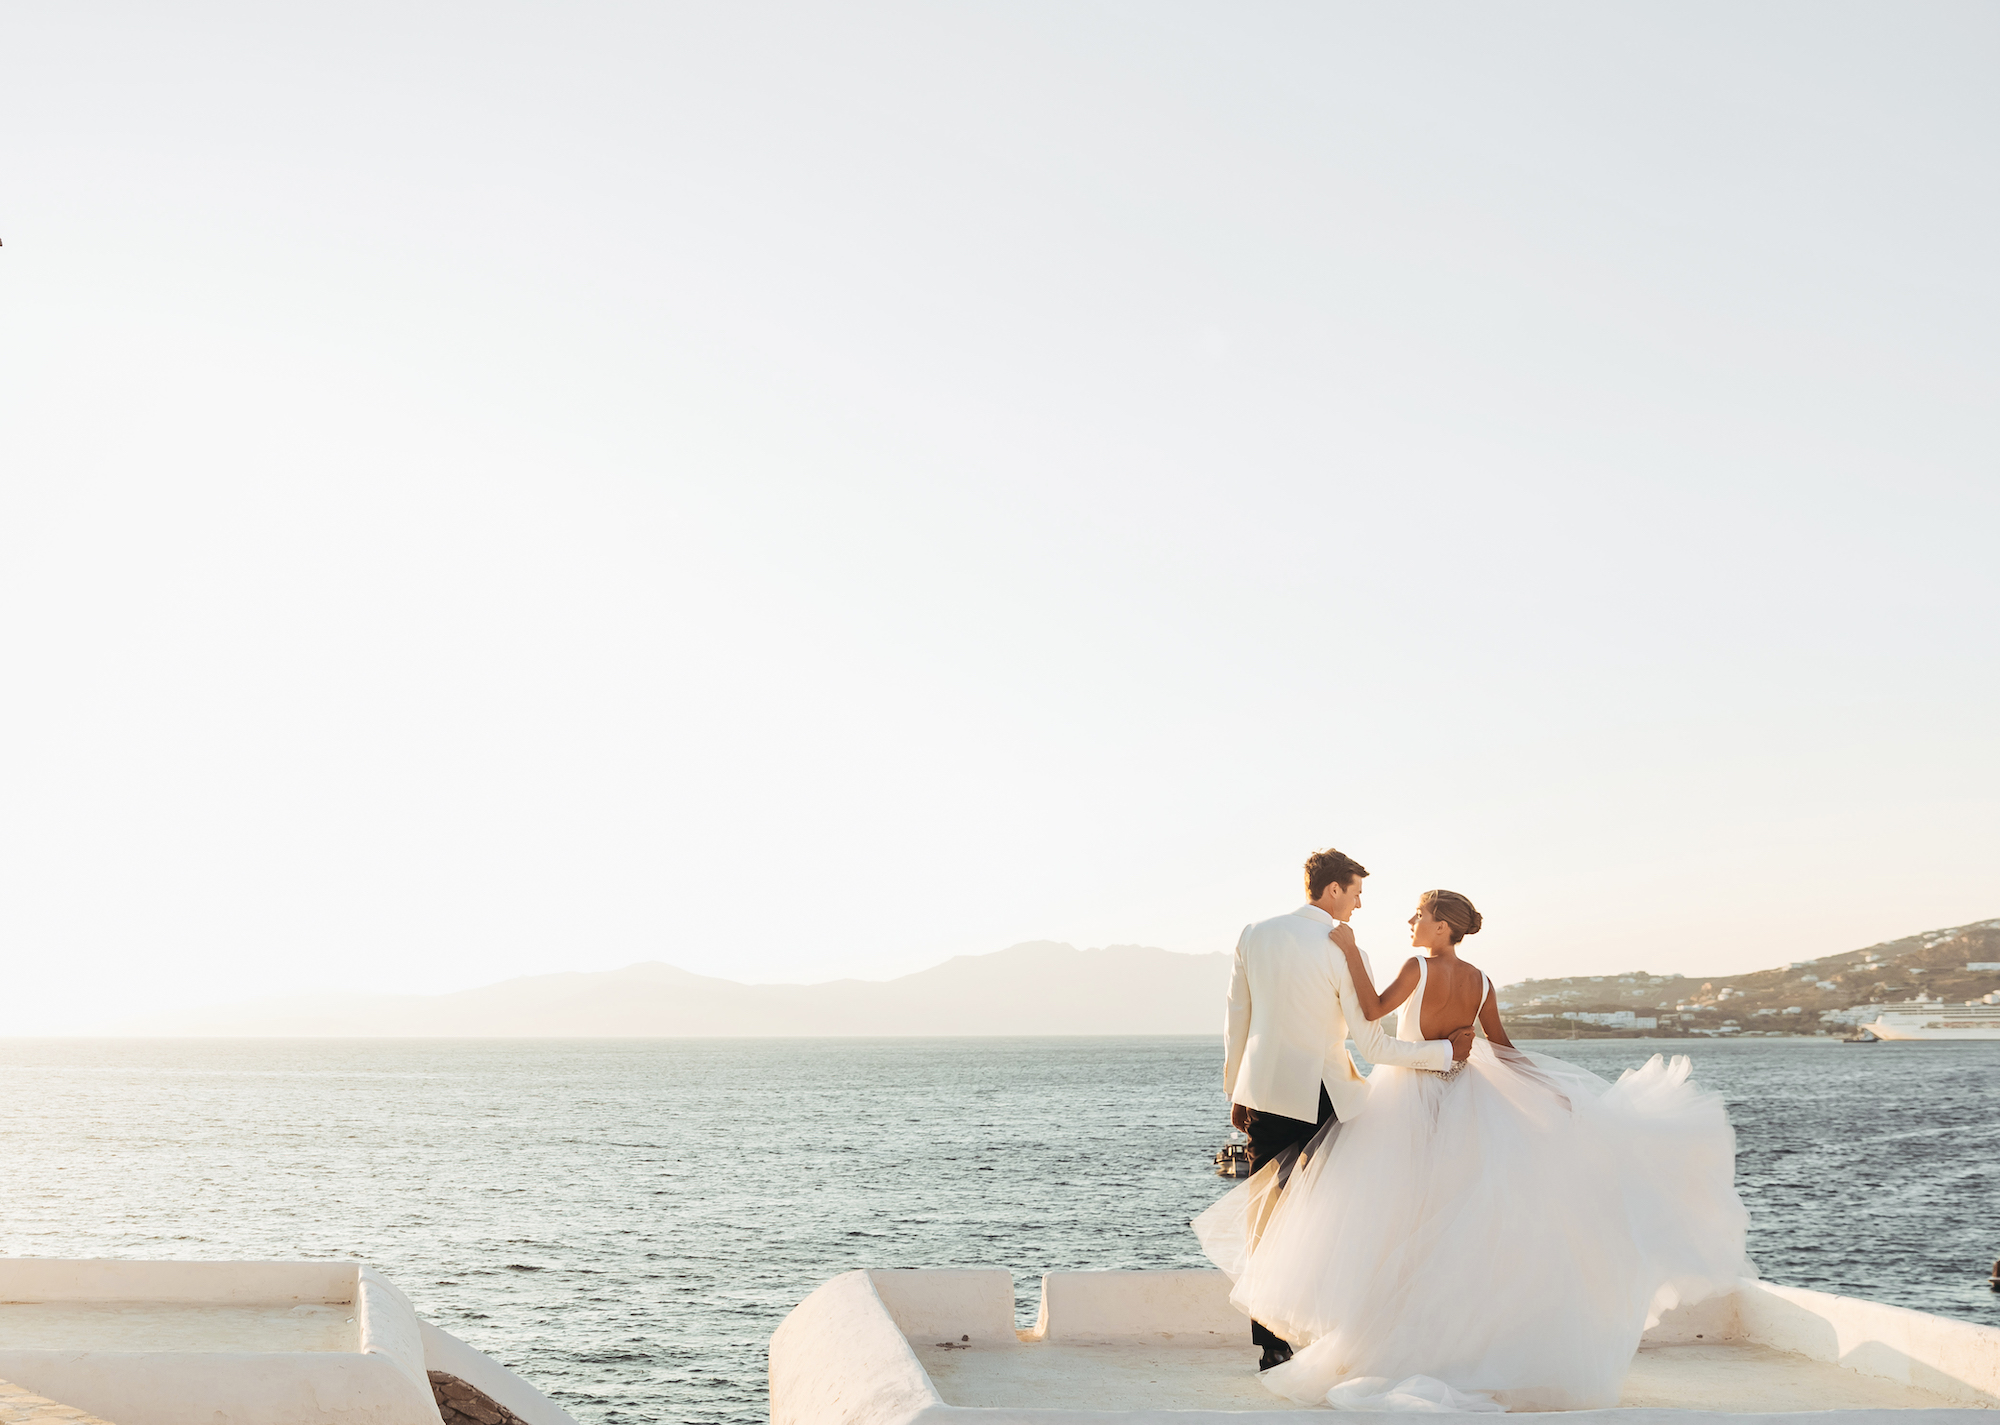 Top Reasons to Have Your Wedding in Cabo San Lucas